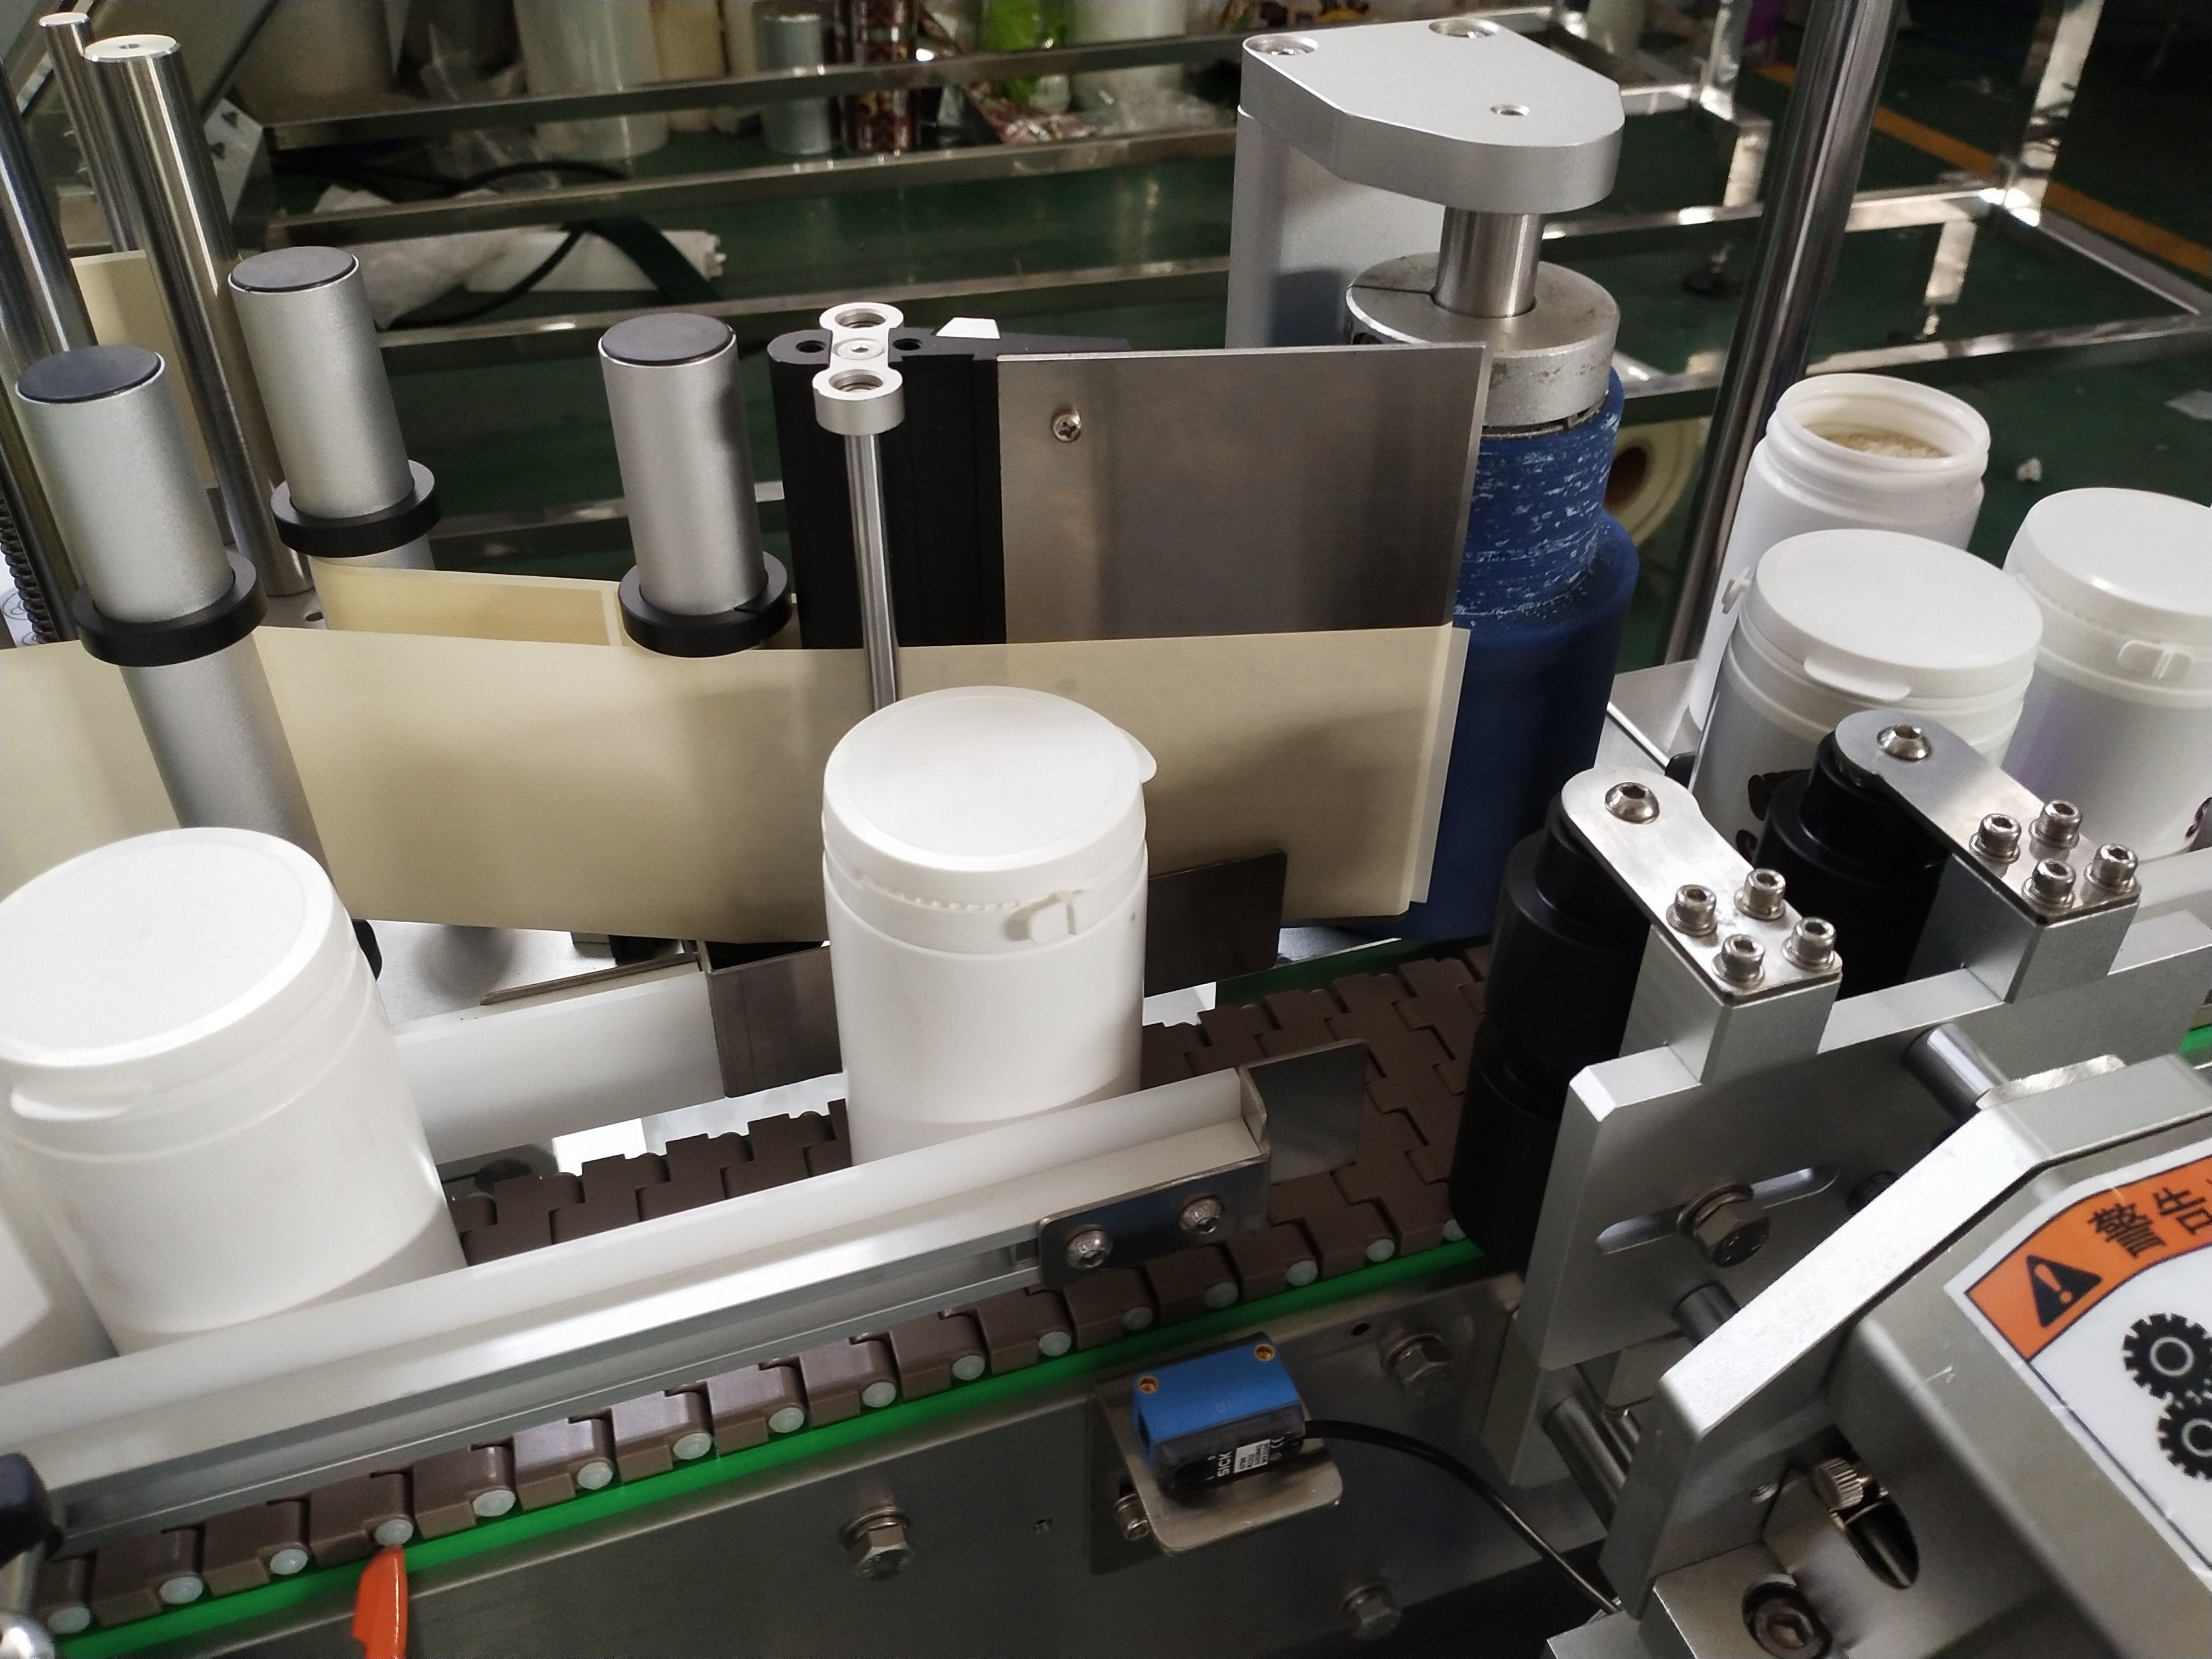 Fully Automatic Labeling Machine Sticker Labeling For Round Bottle Candy Bottle